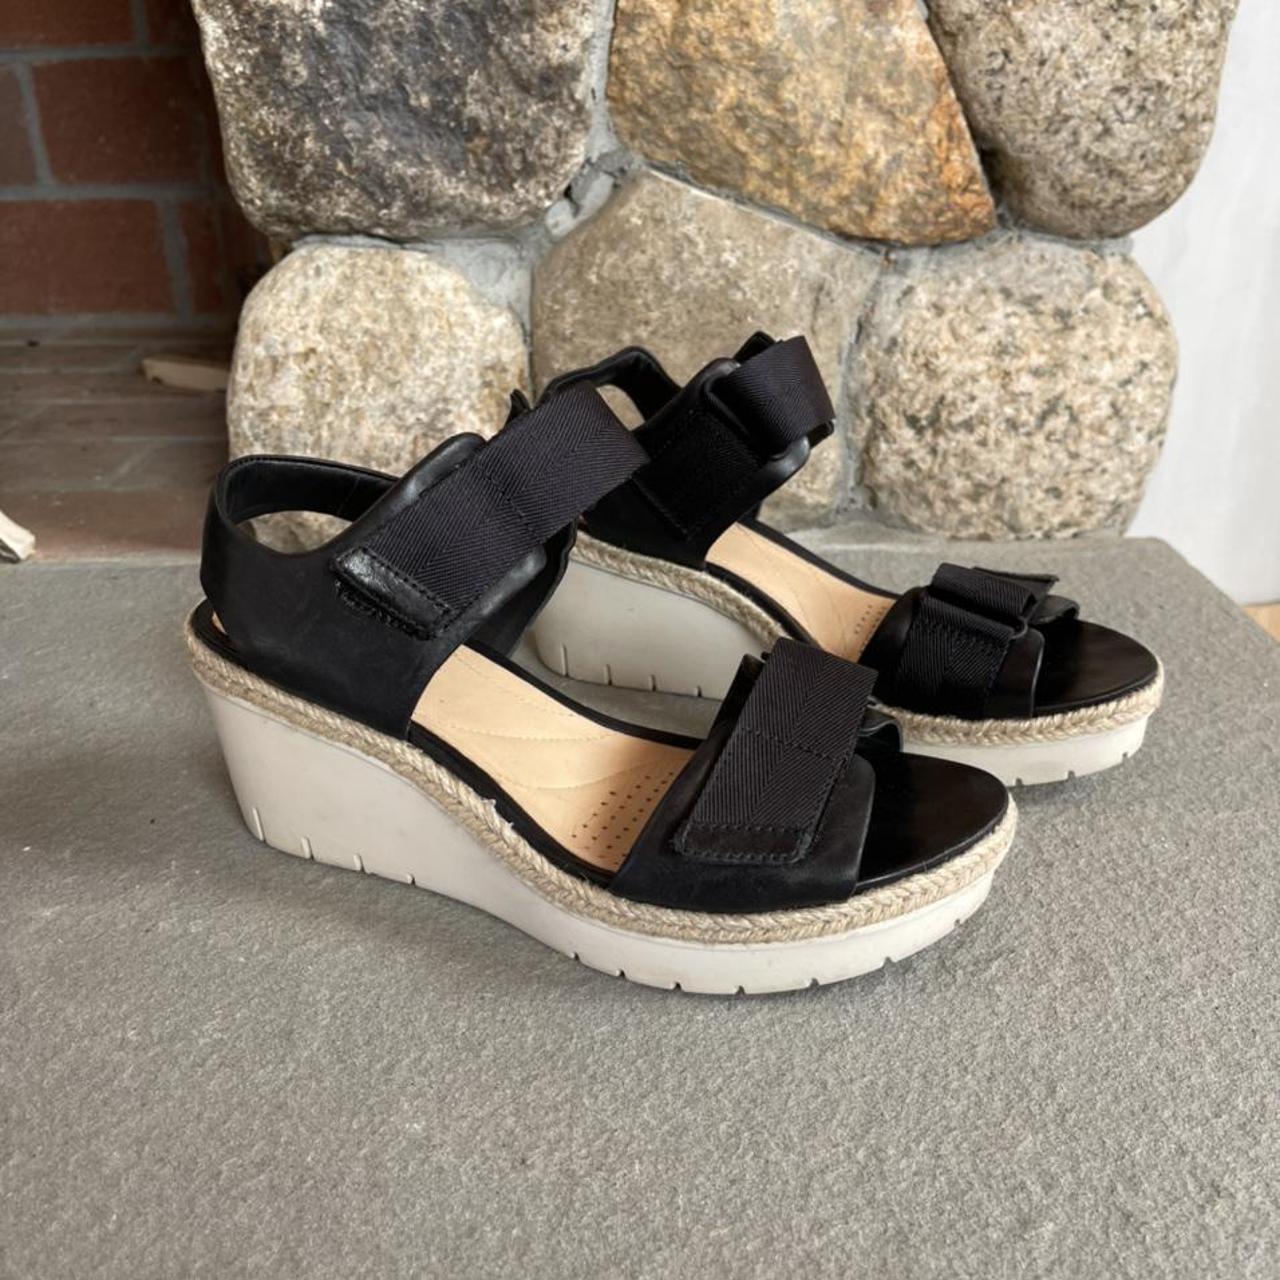 Strappy sandal wedges. Clarks. Size 8. Extremely... - Depop